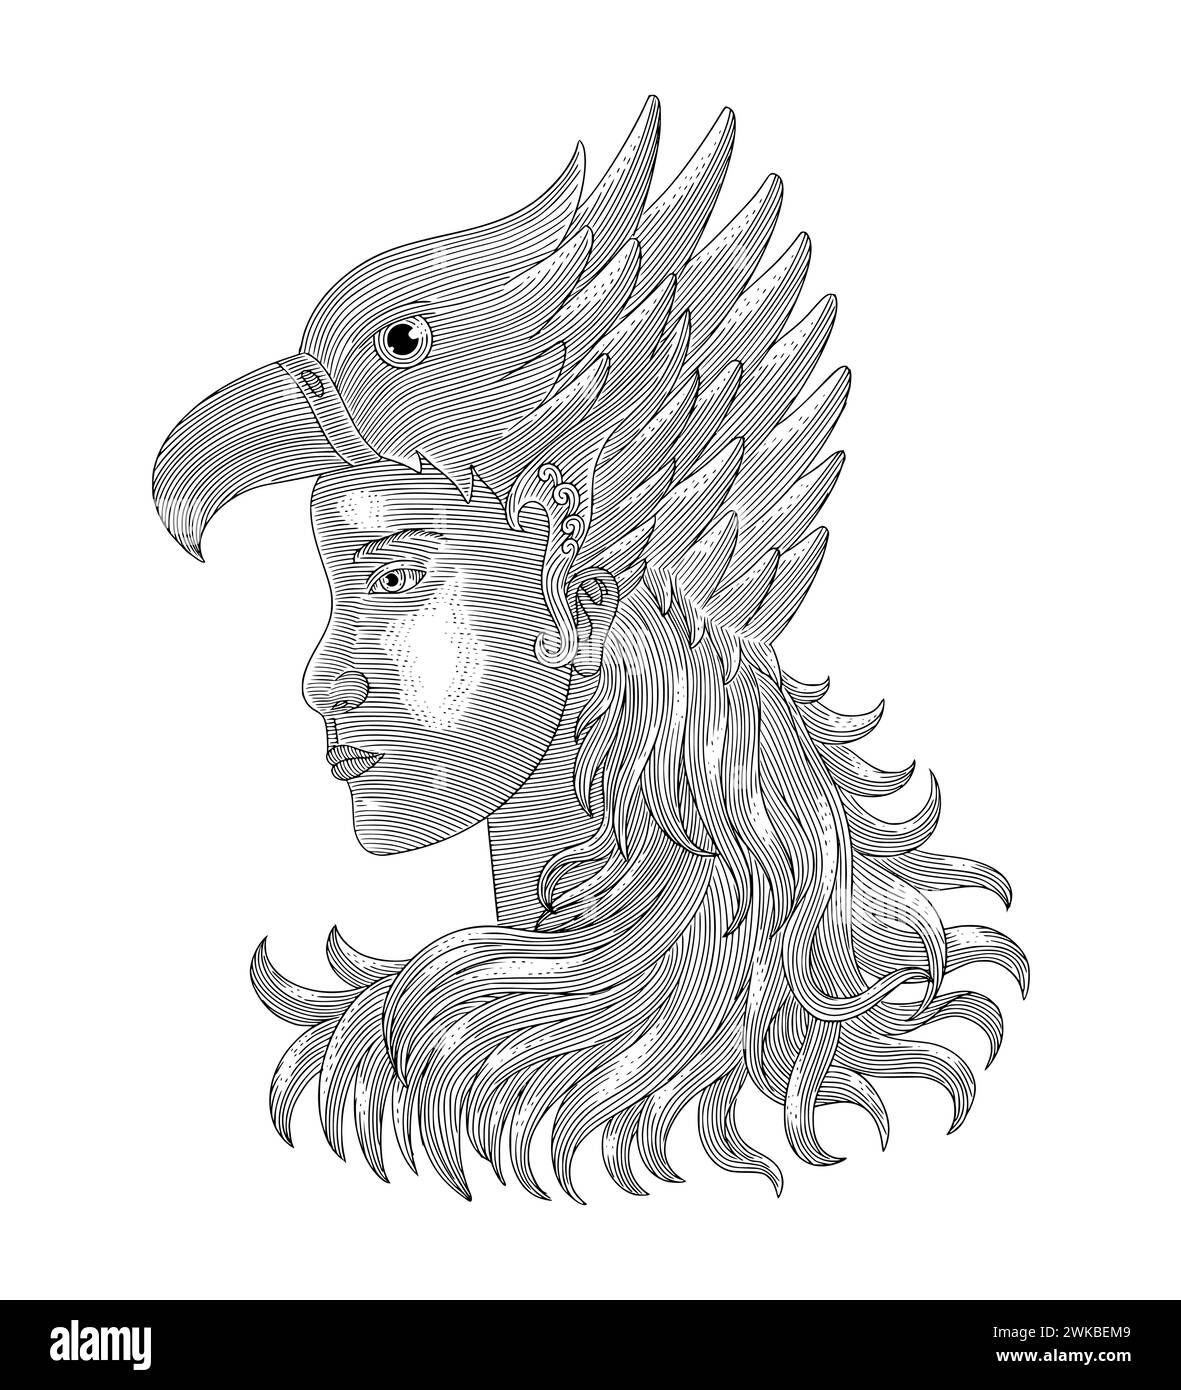 american young girl with eagle mask. Vintage engraving drawing syle illustration Stock Vector